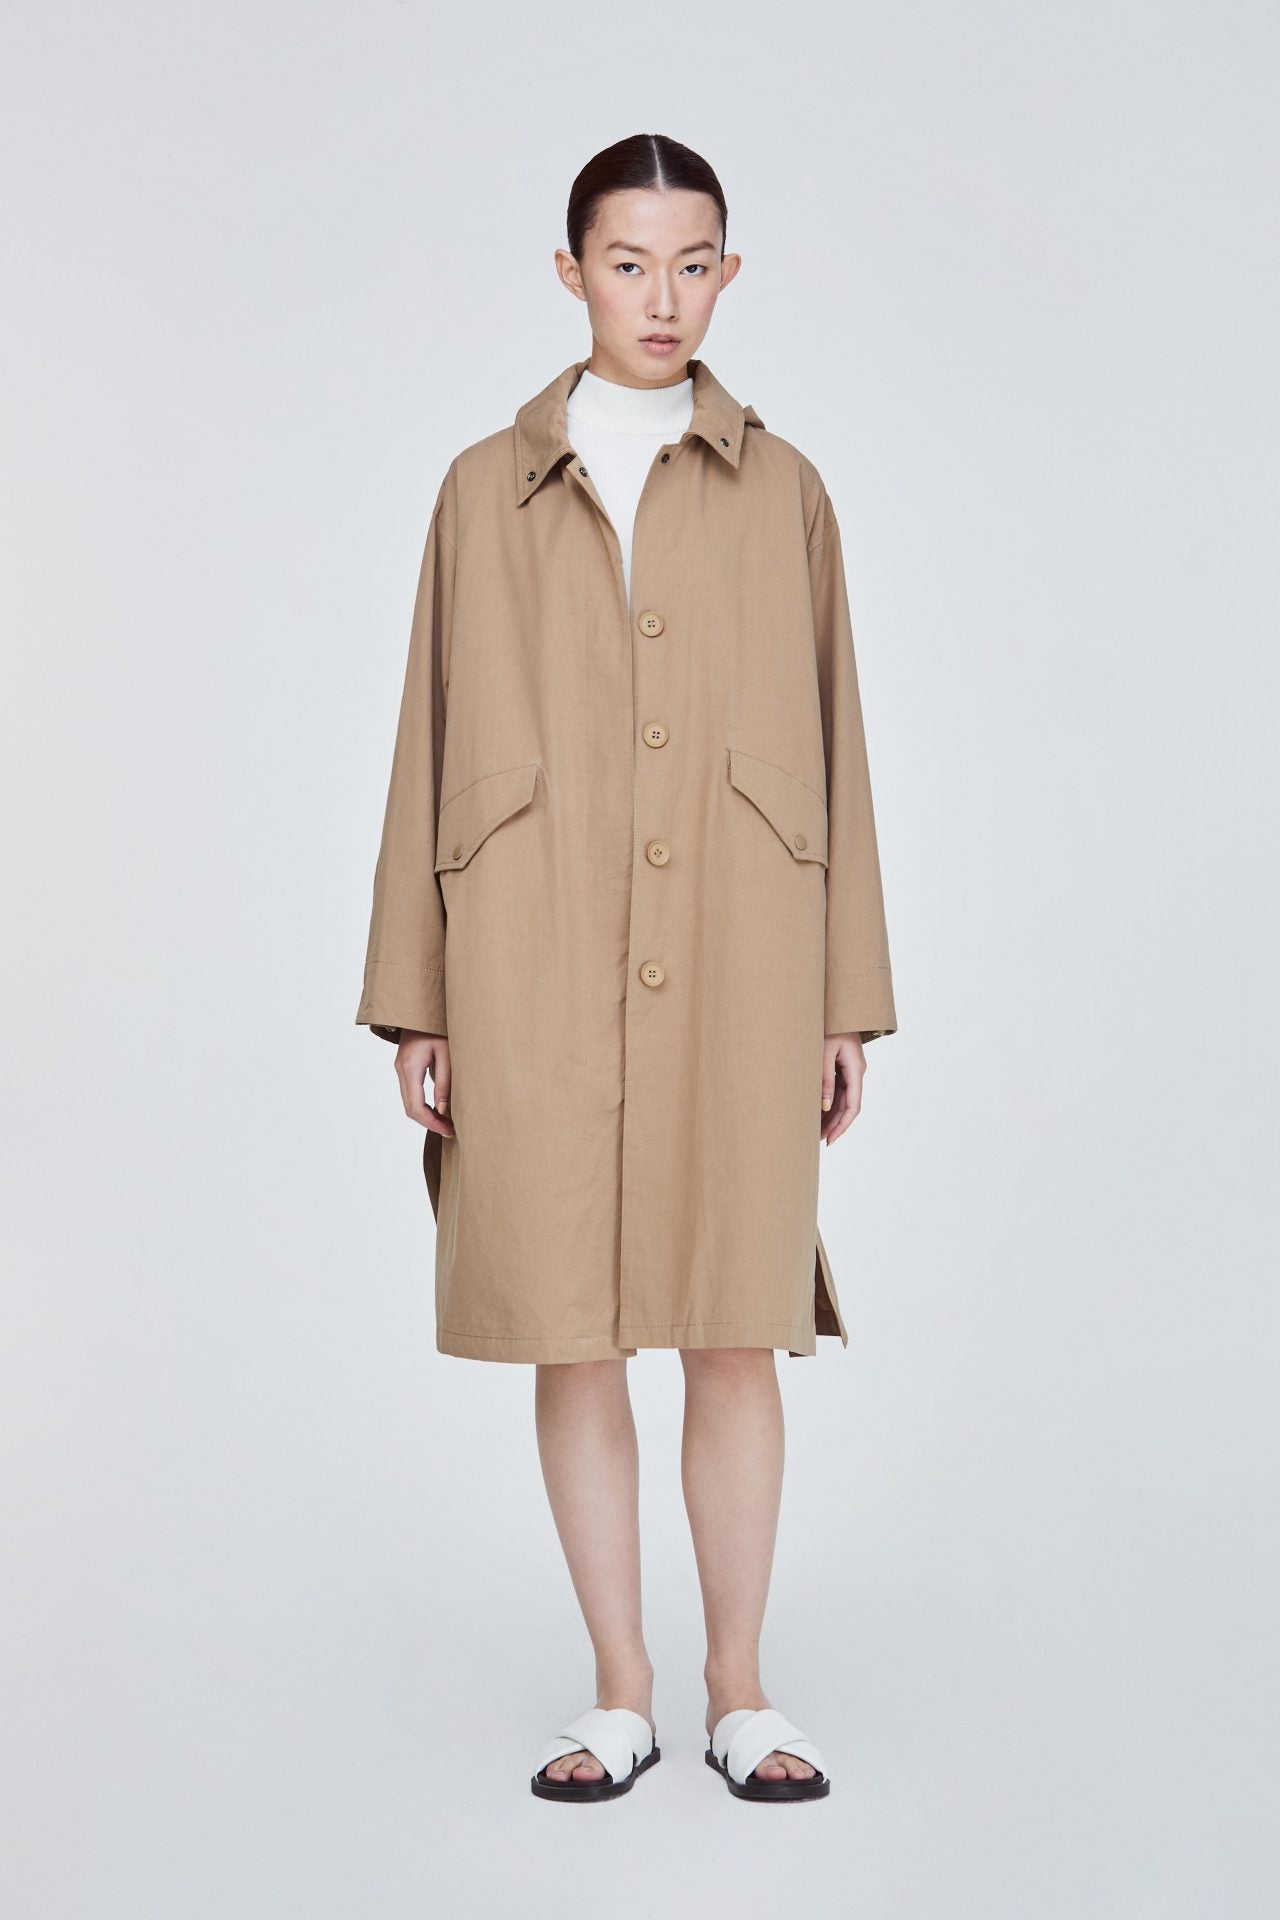 BJK 11024 HOODED COLLARED BUTTON-DOWN TRENCH COAT KHAKI